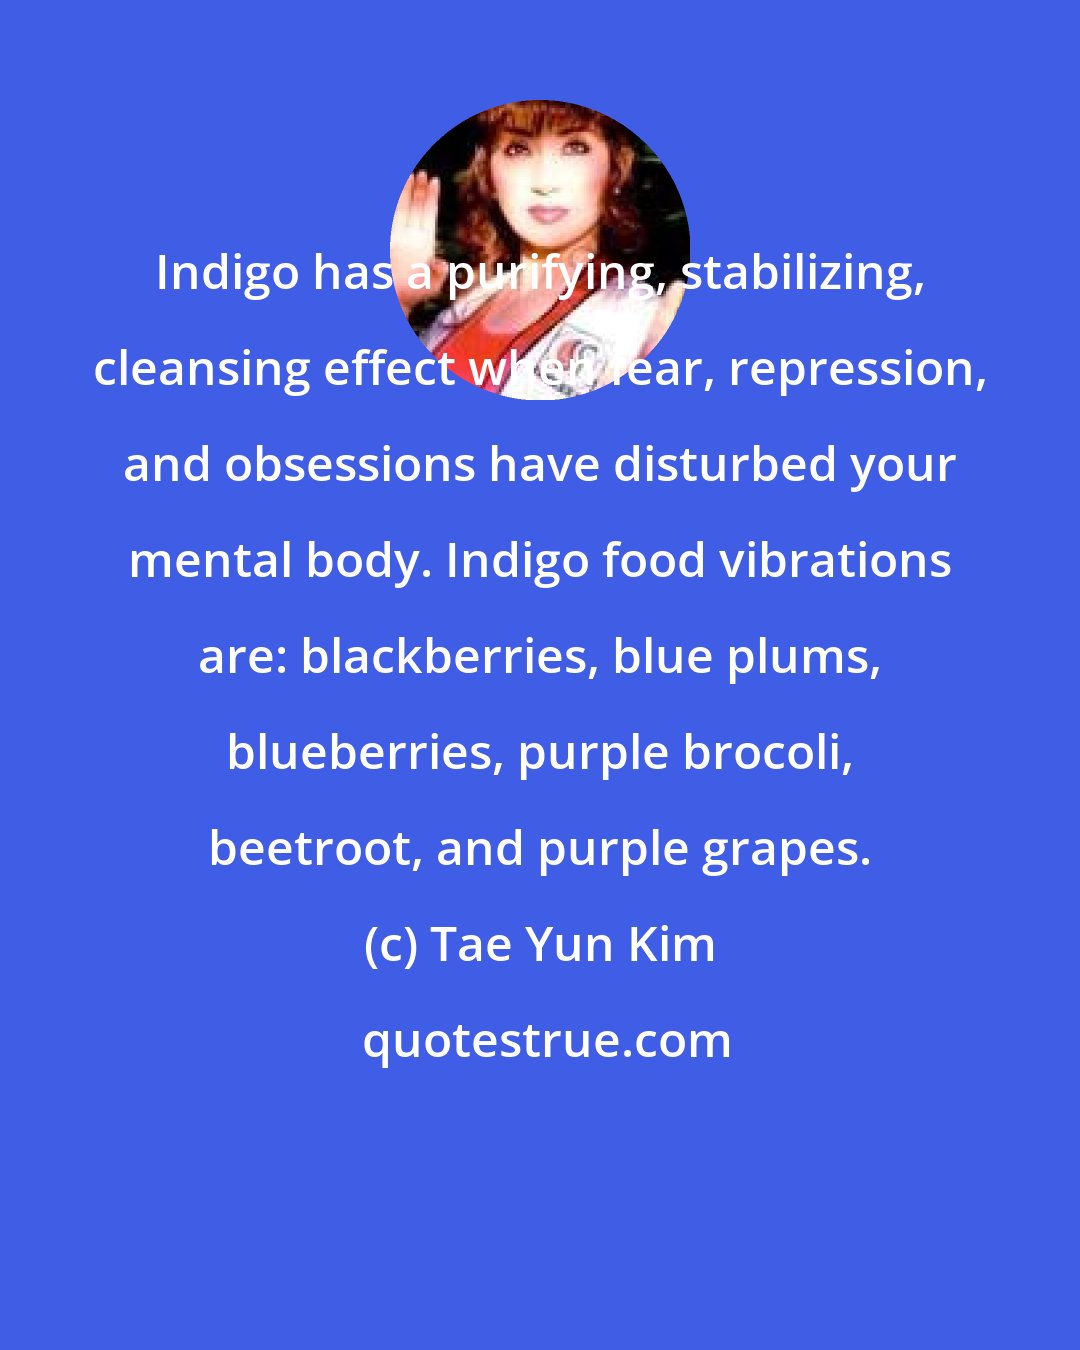 Tae Yun Kim: Indigo has a purifying, stabilizing, cleansing effect when fear, repression, and obsessions have disturbed your mental body. Indigo food vibrations are: blackberries, blue plums, blueberries, purple brocoli, beetroot, and purple grapes.